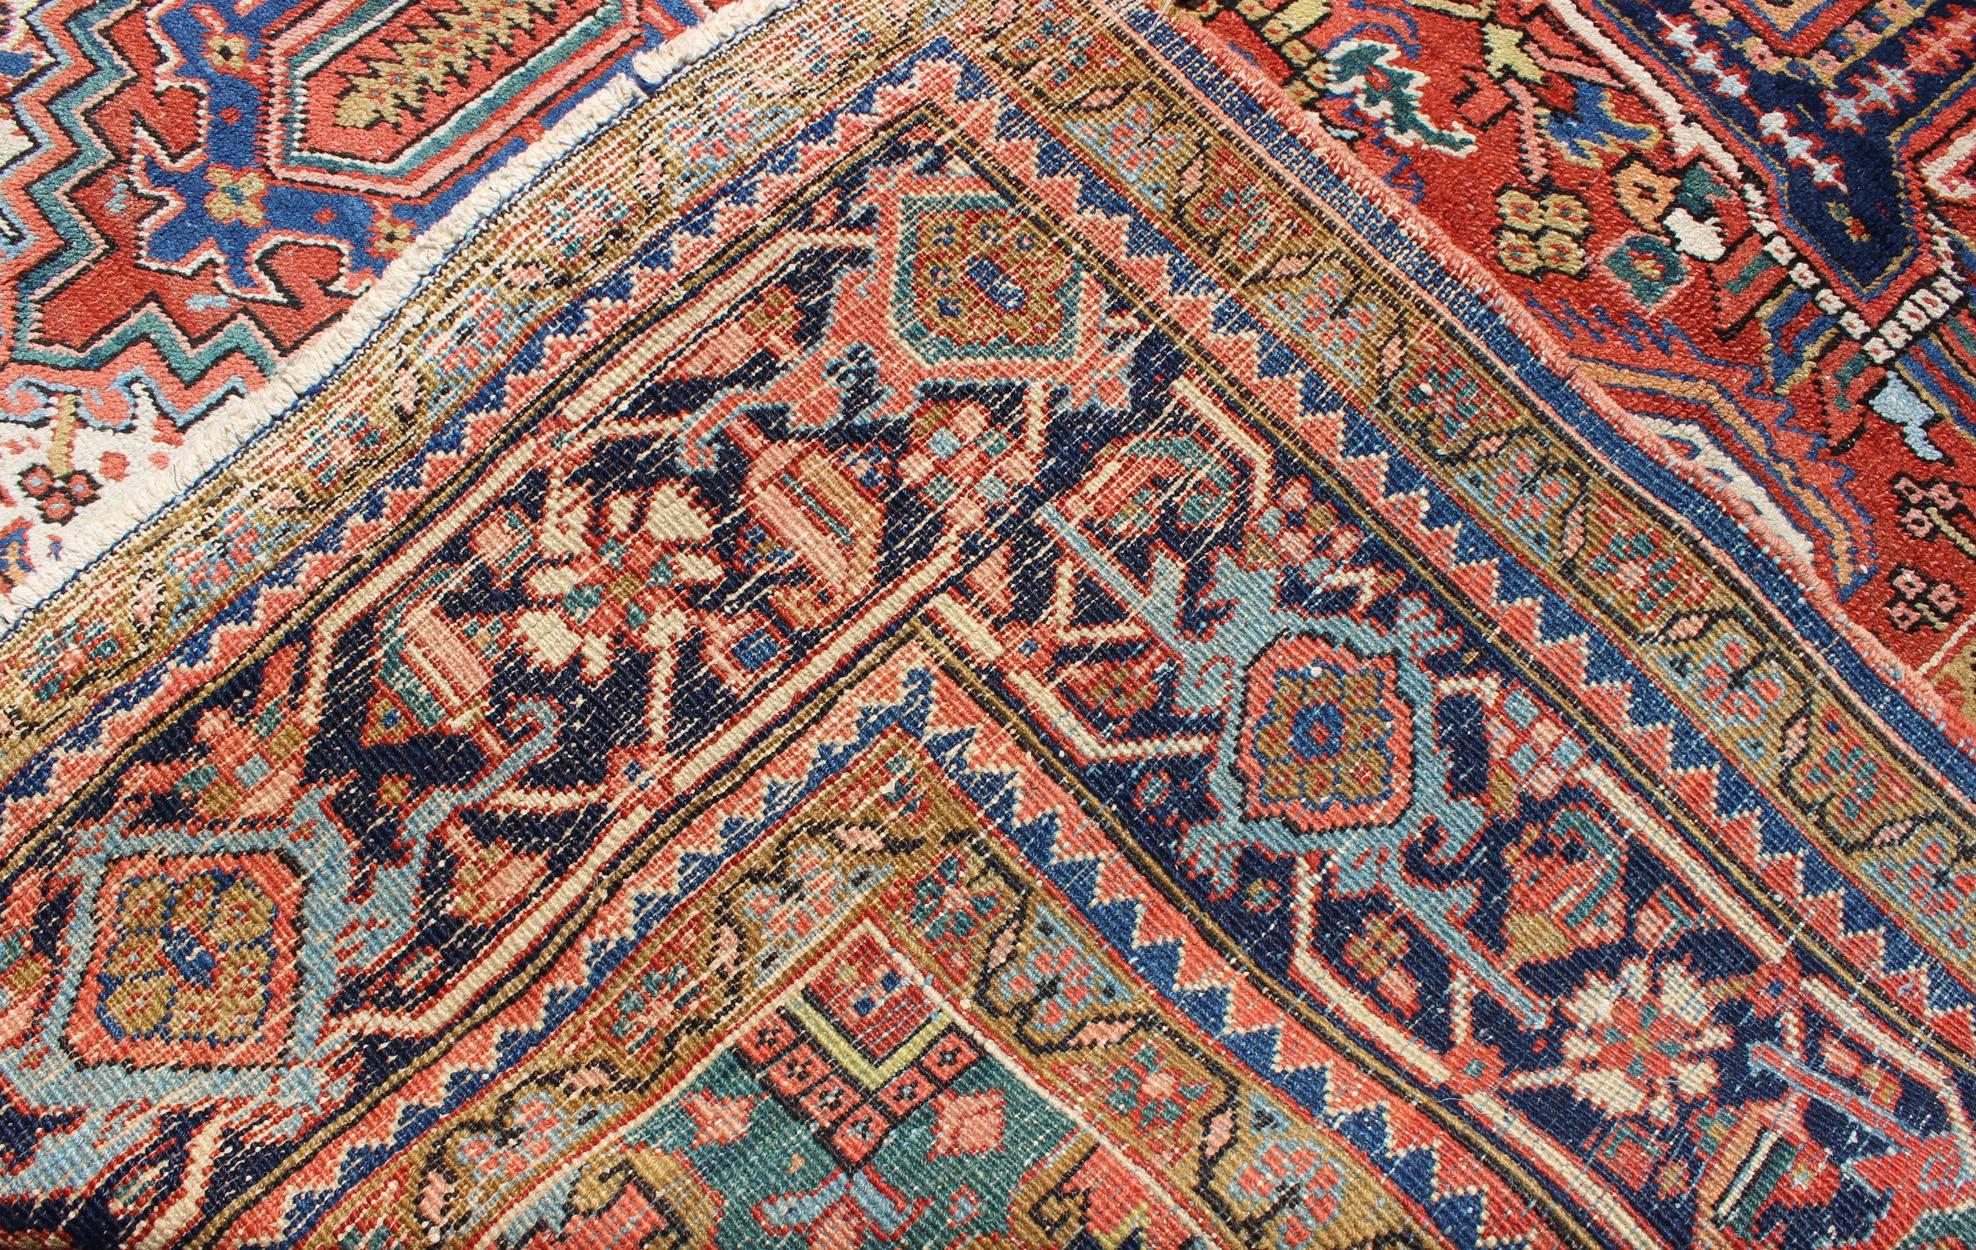 Wool Antique Colorful Persian Heriz Rug with Geometric Patterns and Intricate Design For Sale